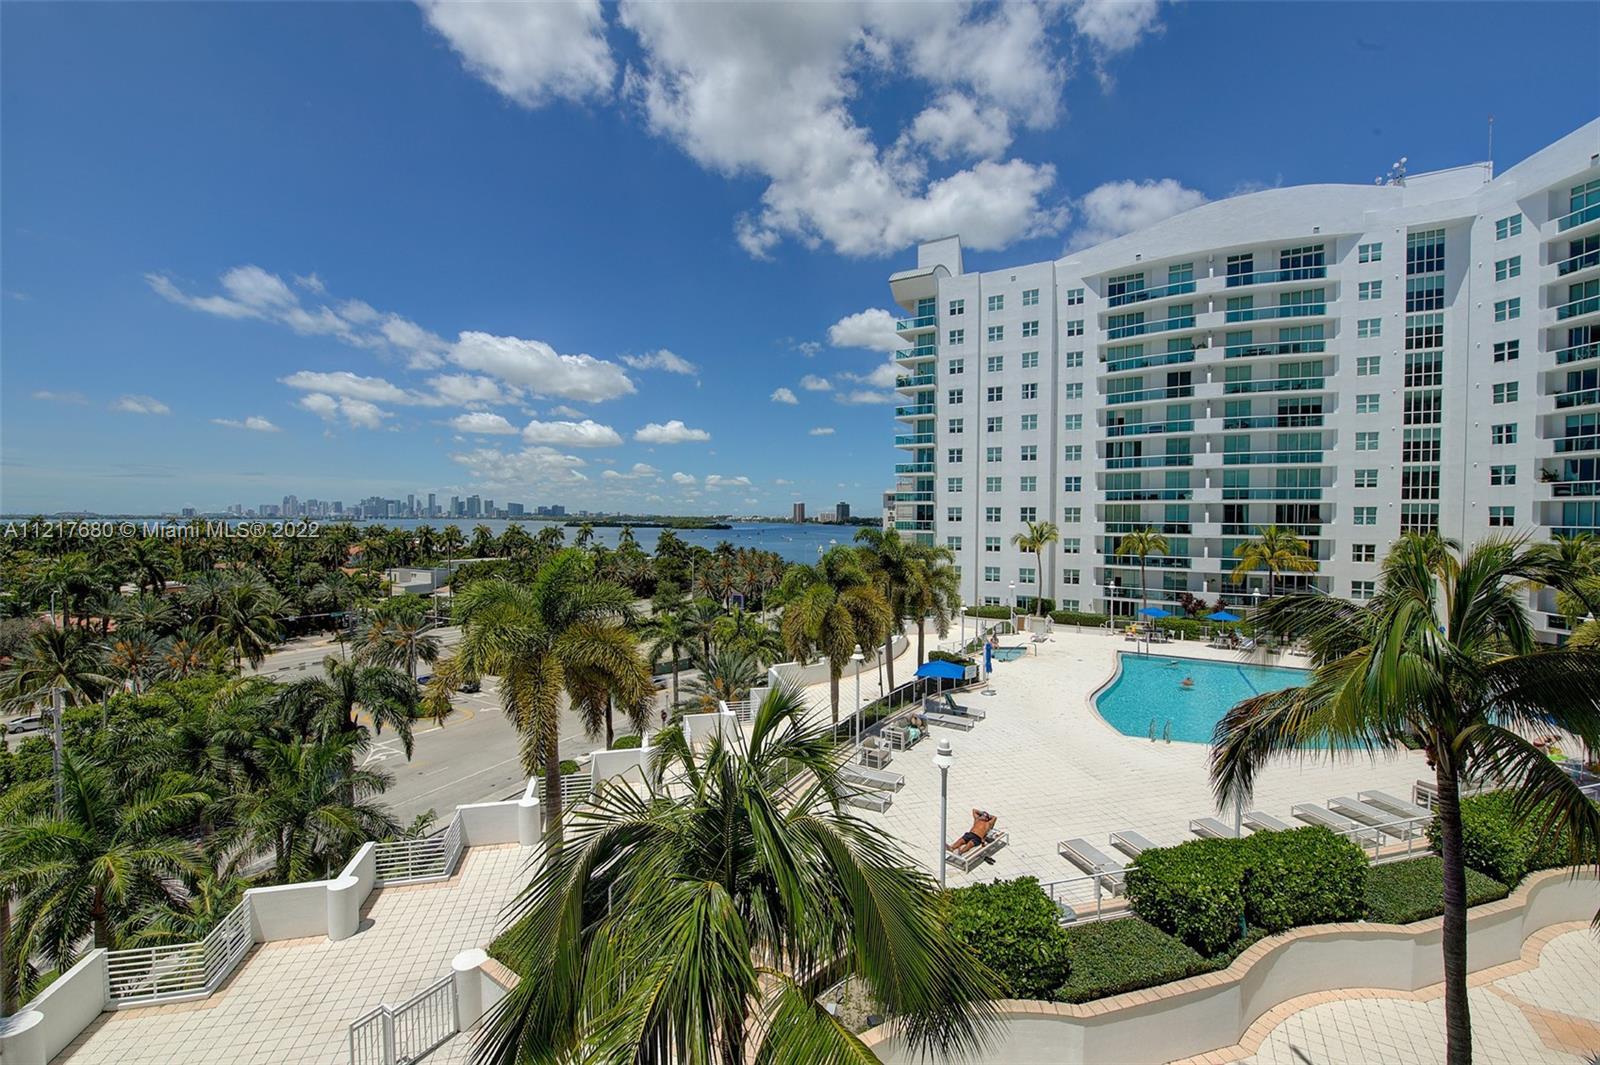 Live in luxury at the "360"! overlooking beautiful Biscayne bay & the intracoastal waterway from a h